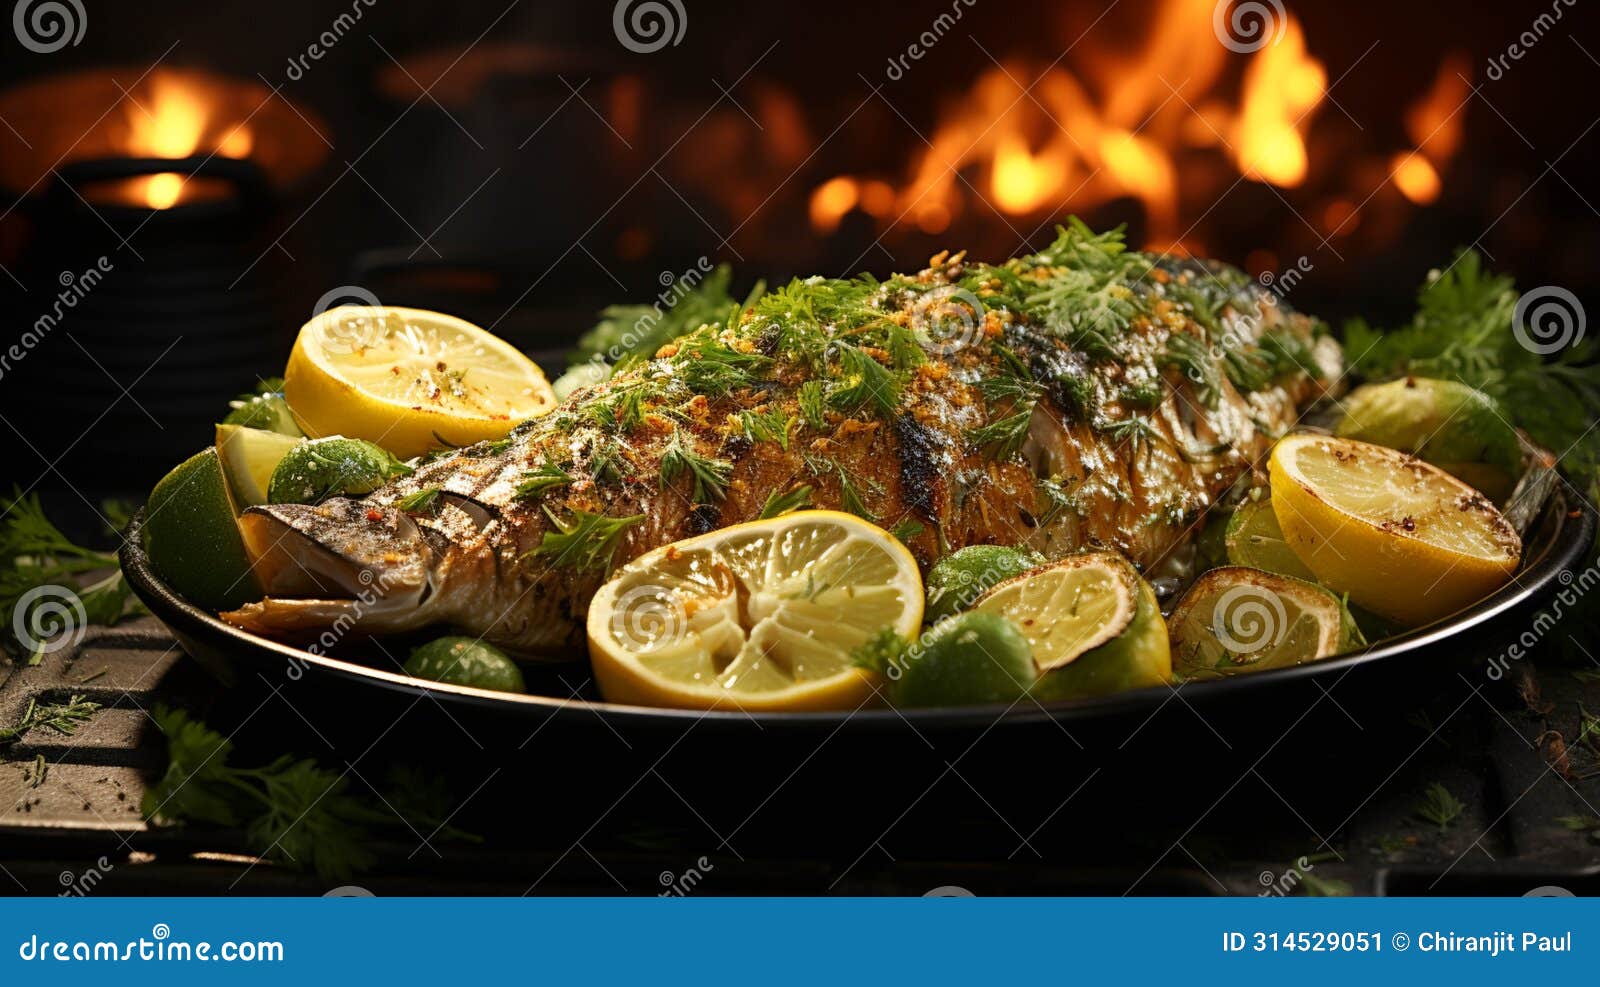 dorado grilled on a barbecue and charcoal in a plate on green color background